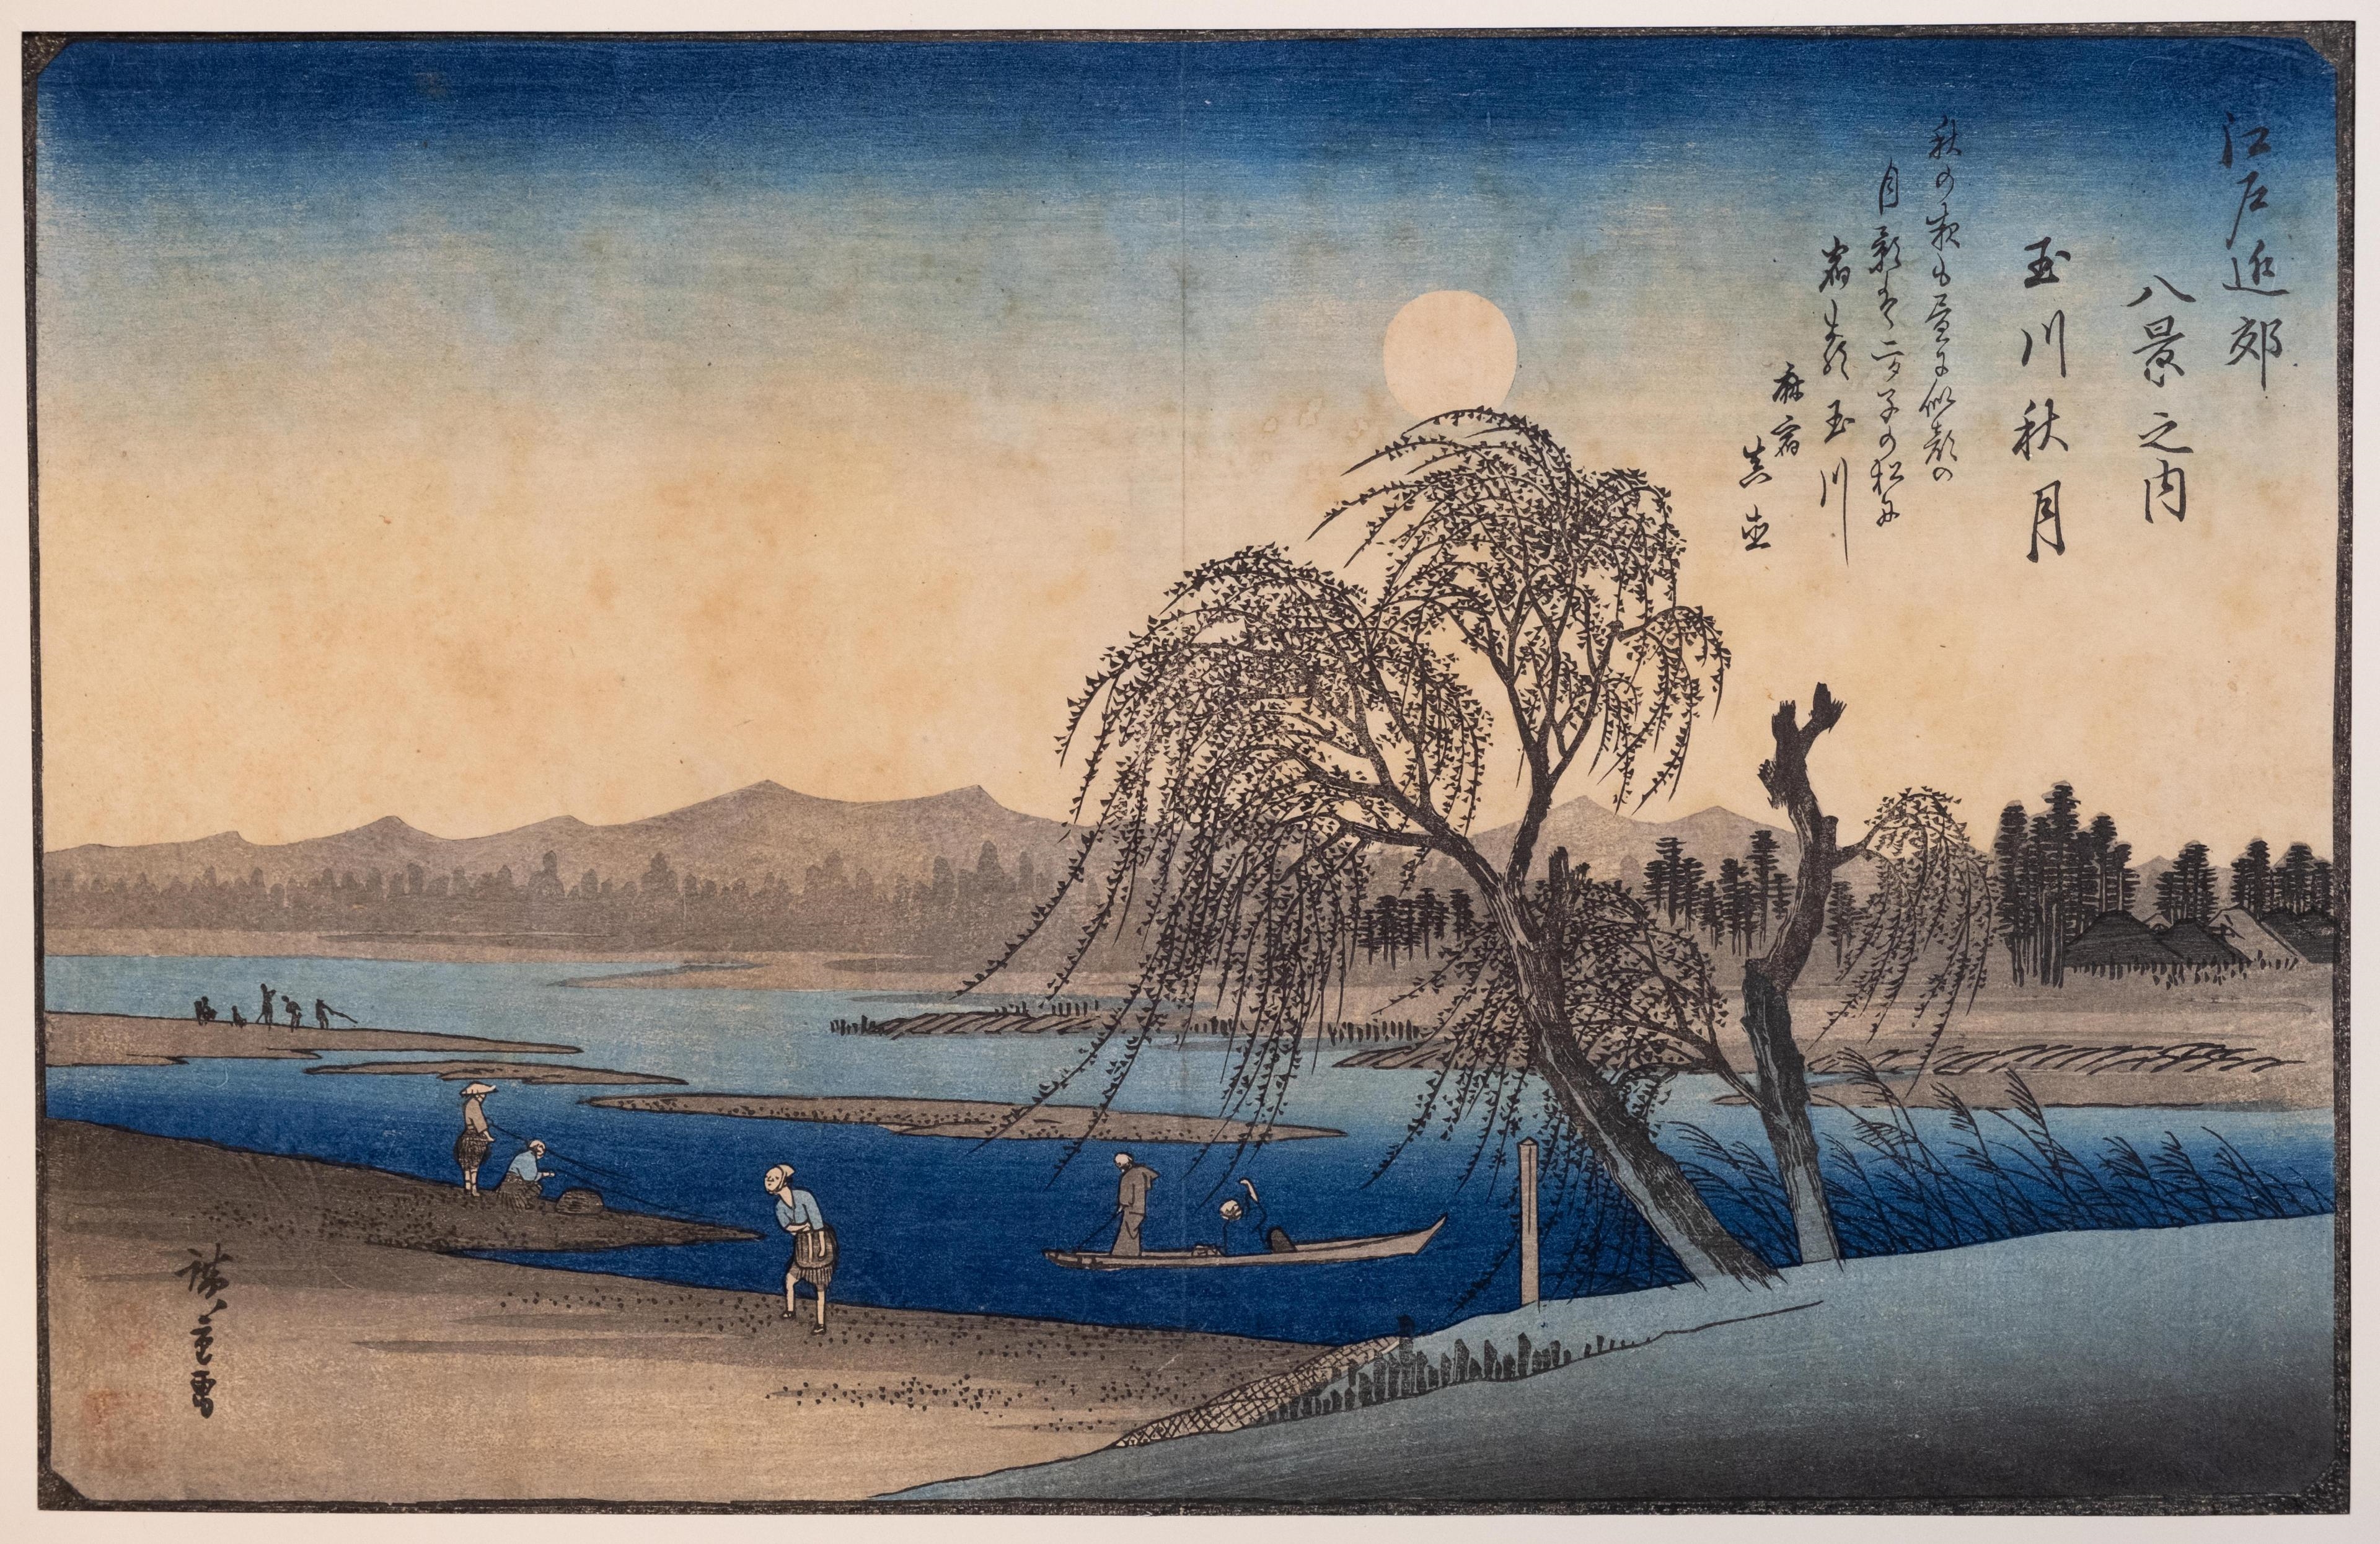 [JAPANESE PRINTS] – HIROSHIGE, Utagawa (1797-1858). Lot of 4 col. woodcuts (dep. various landscapes of which 2 with Mount Fuji in the background).